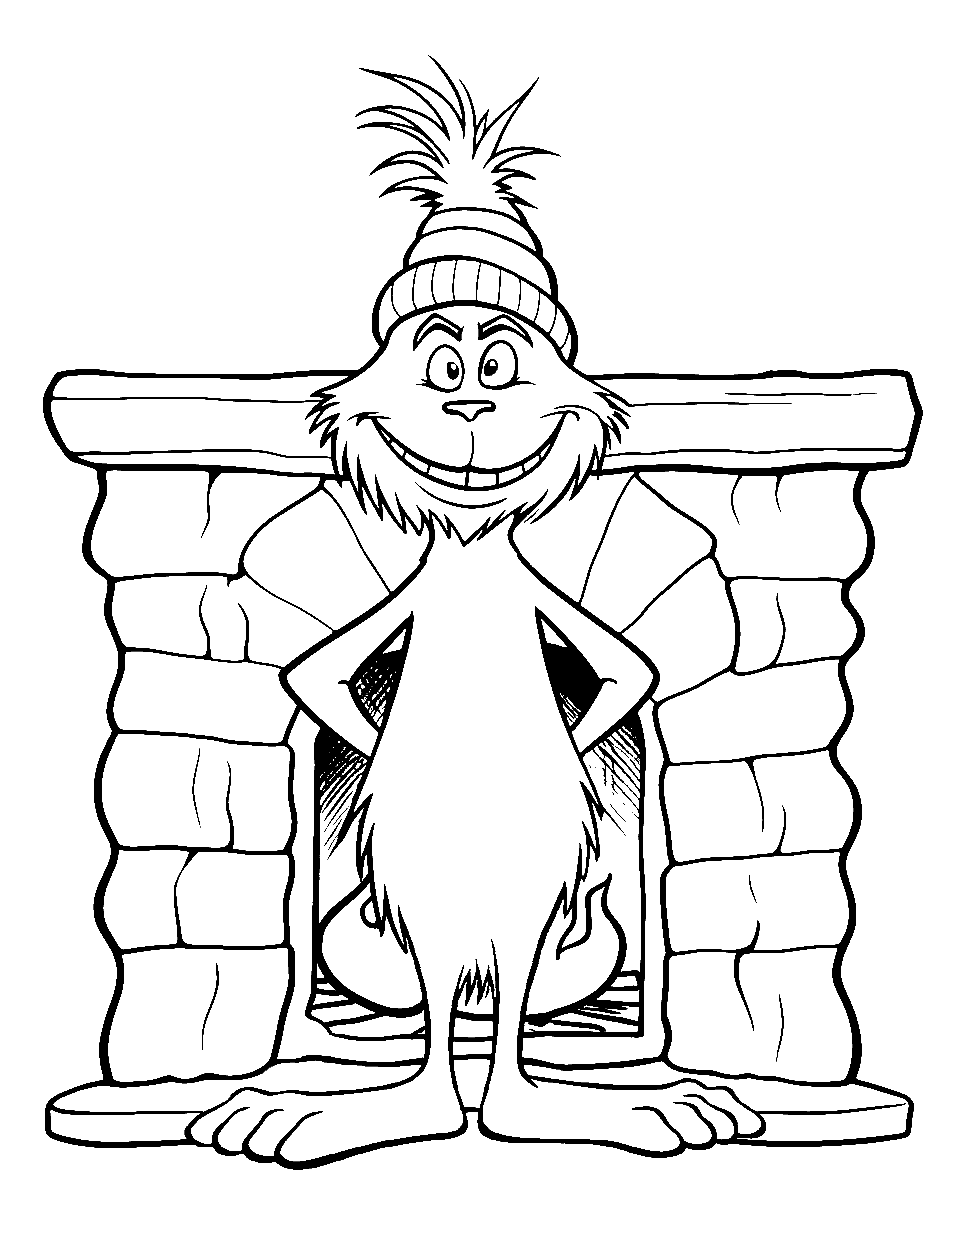 Grinch's and Fireplace Coloring Page - The Grinch standing by a fireplace on a cold winter night.